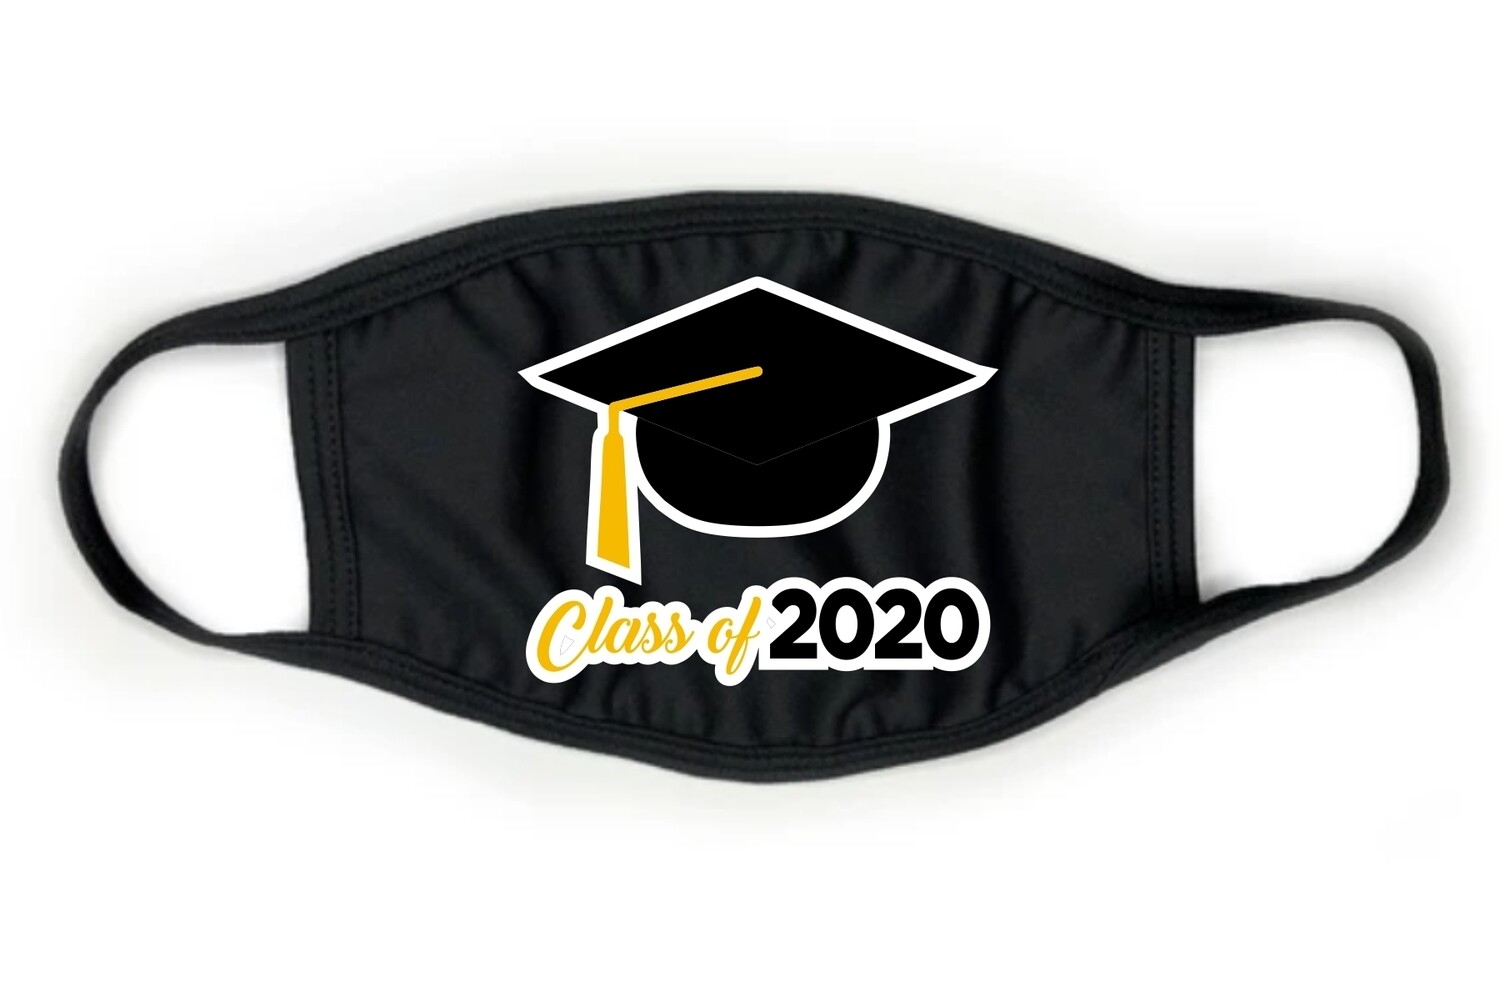 Class of 2020 Mask